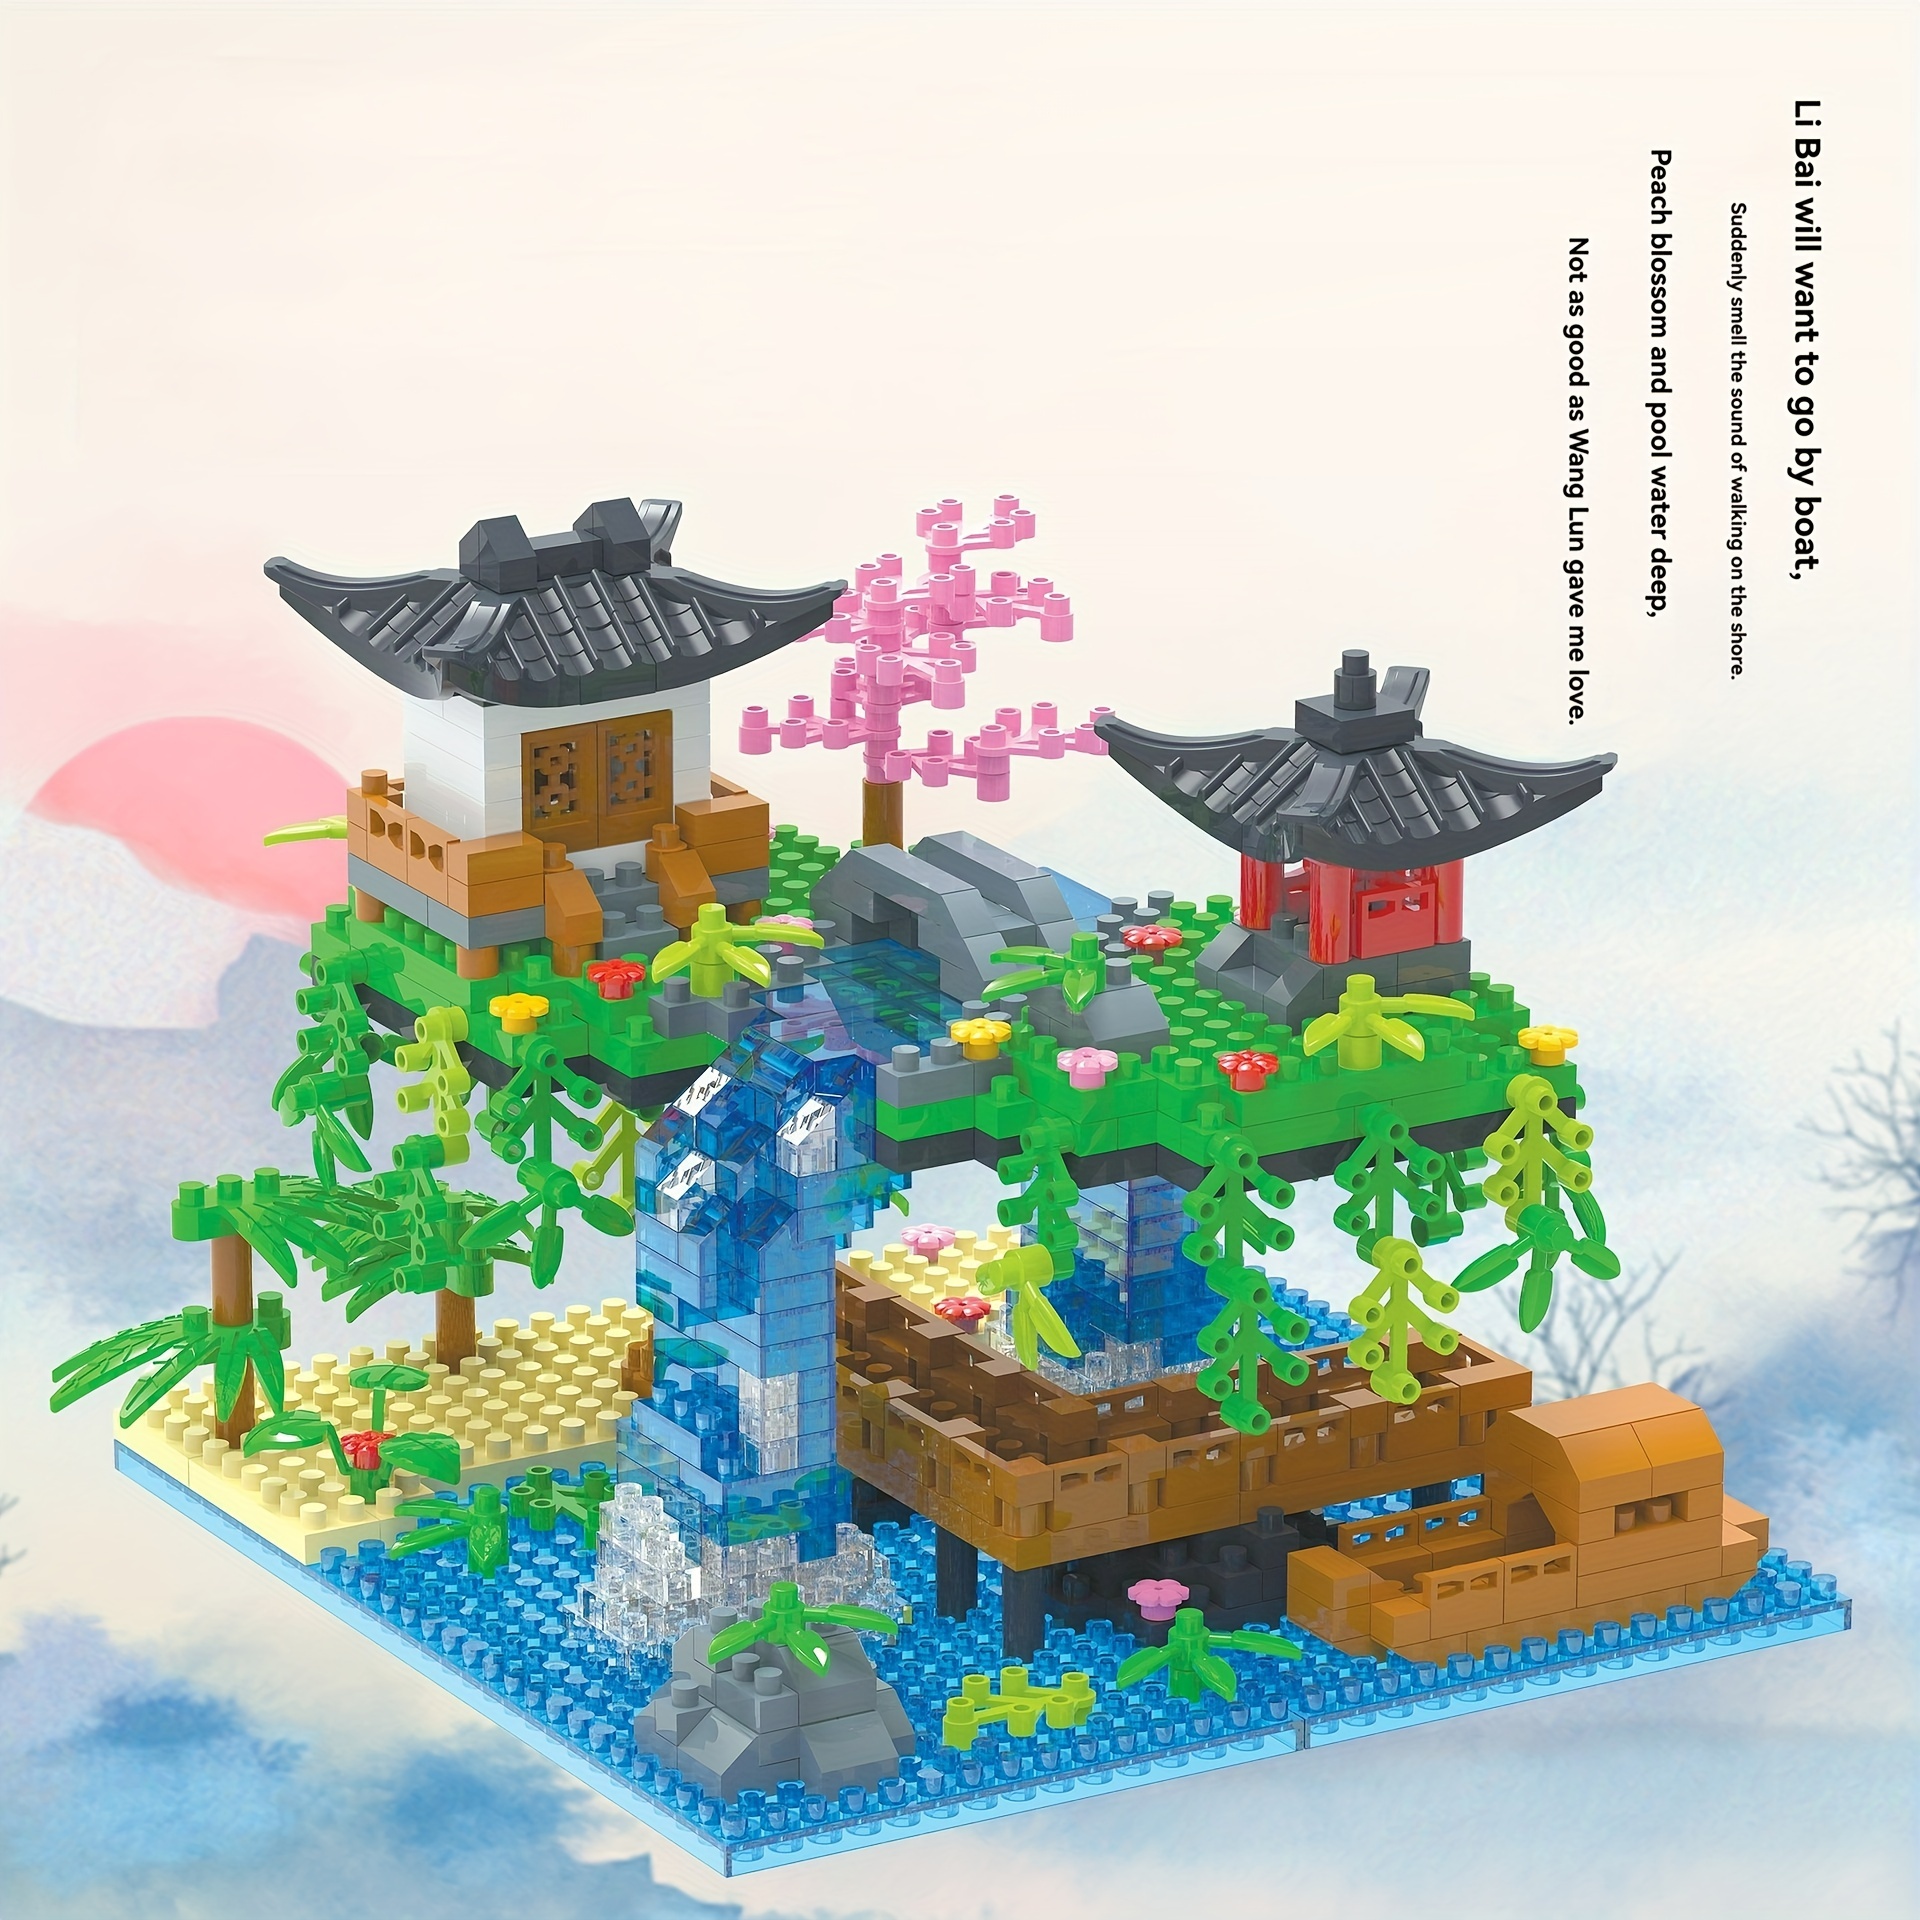 

2180pcs+ Micro Particle Building Blocks - Peach Pool Theme - High Difficulty - Perfect Gift For Adults - Ideal For Christmas, Halloween, And Thanksgiving